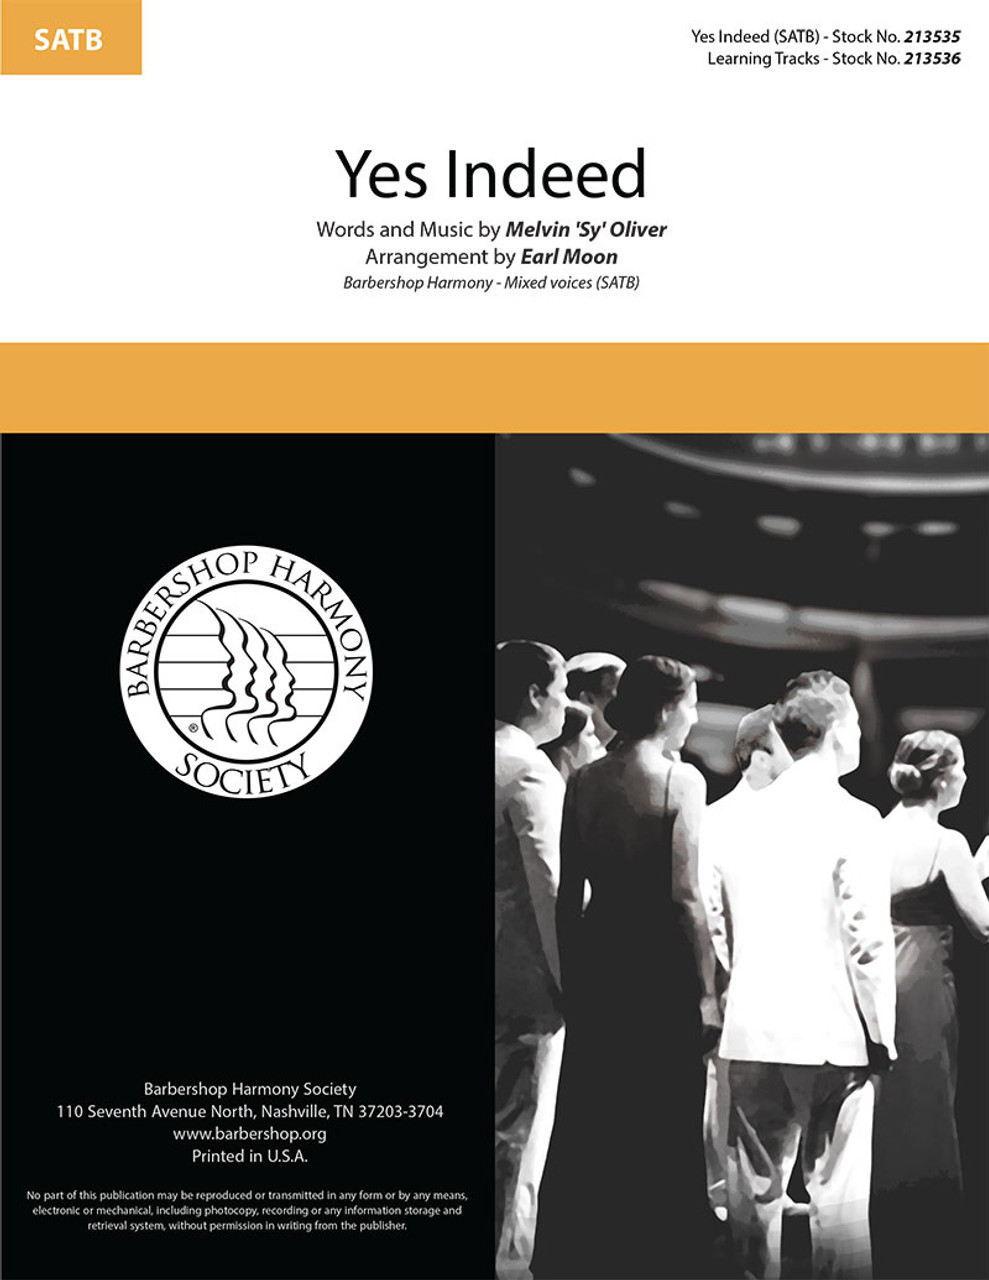 Yes Indeed (SATB) (arr. Moon)